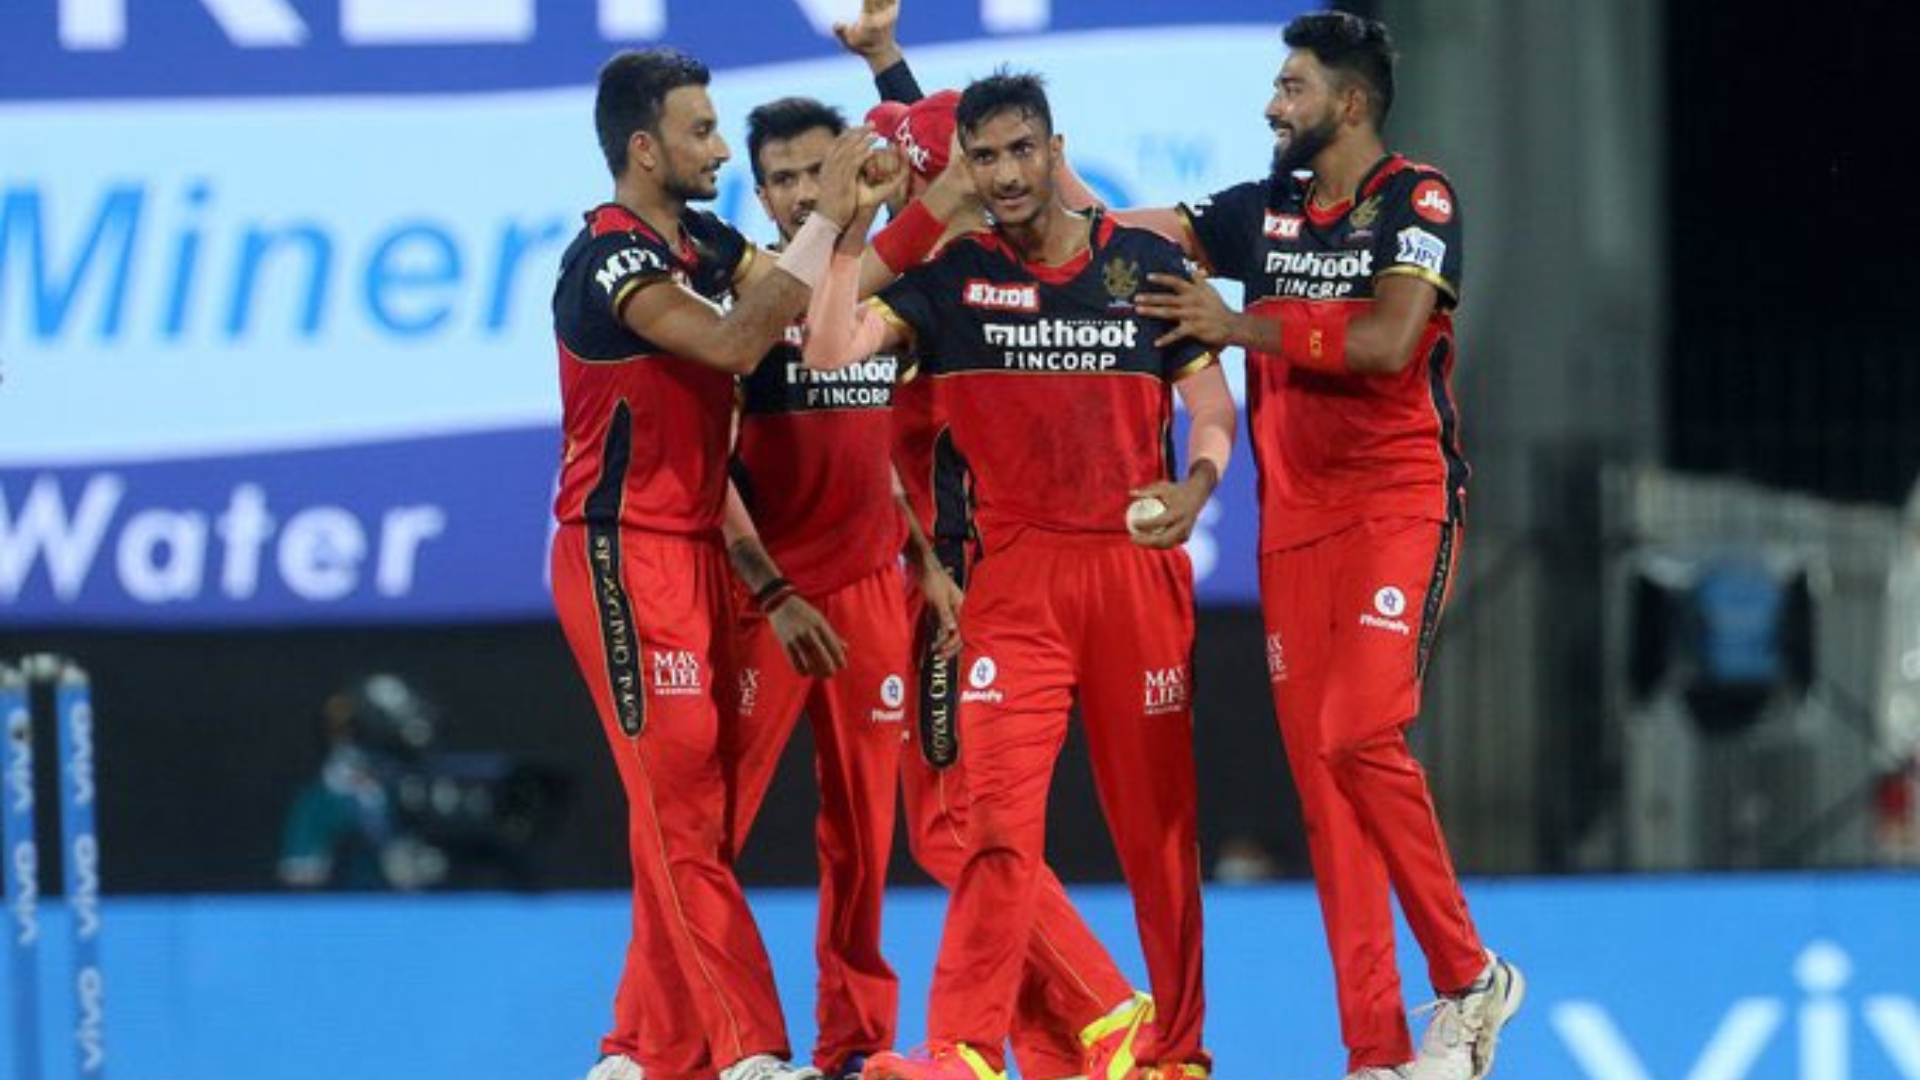 Royal Challengers Bangalore have benefited from great performances in both the batting and bowling.